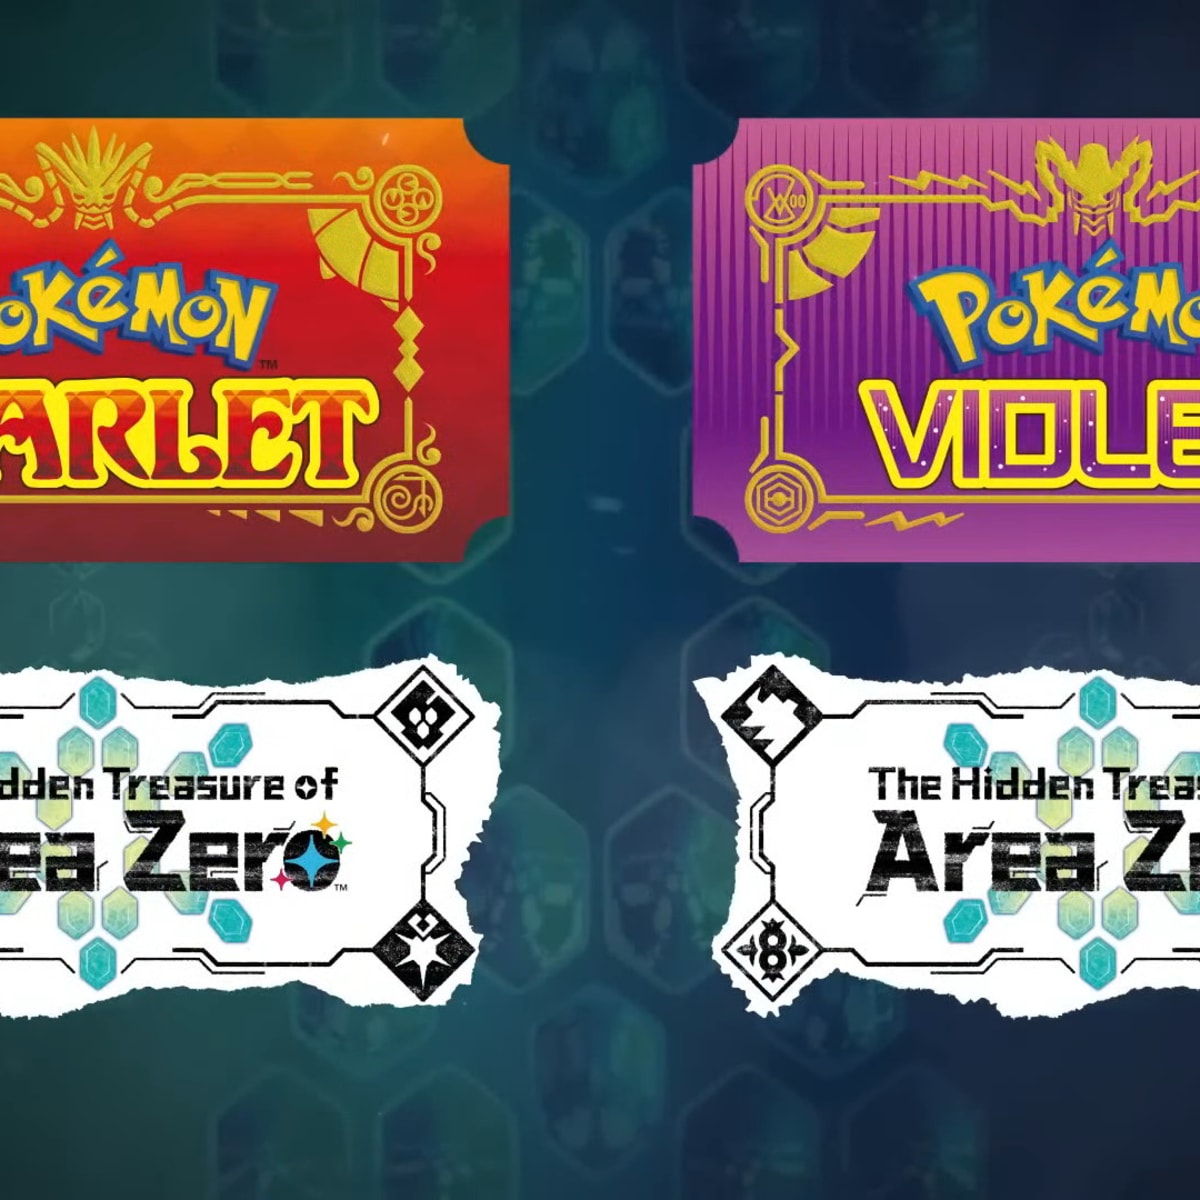 Pokémon Presents summary of the latest information on 'Pokemon Scarlet  Violet Zero's Treasure' and anime and other games - GIGAZINE